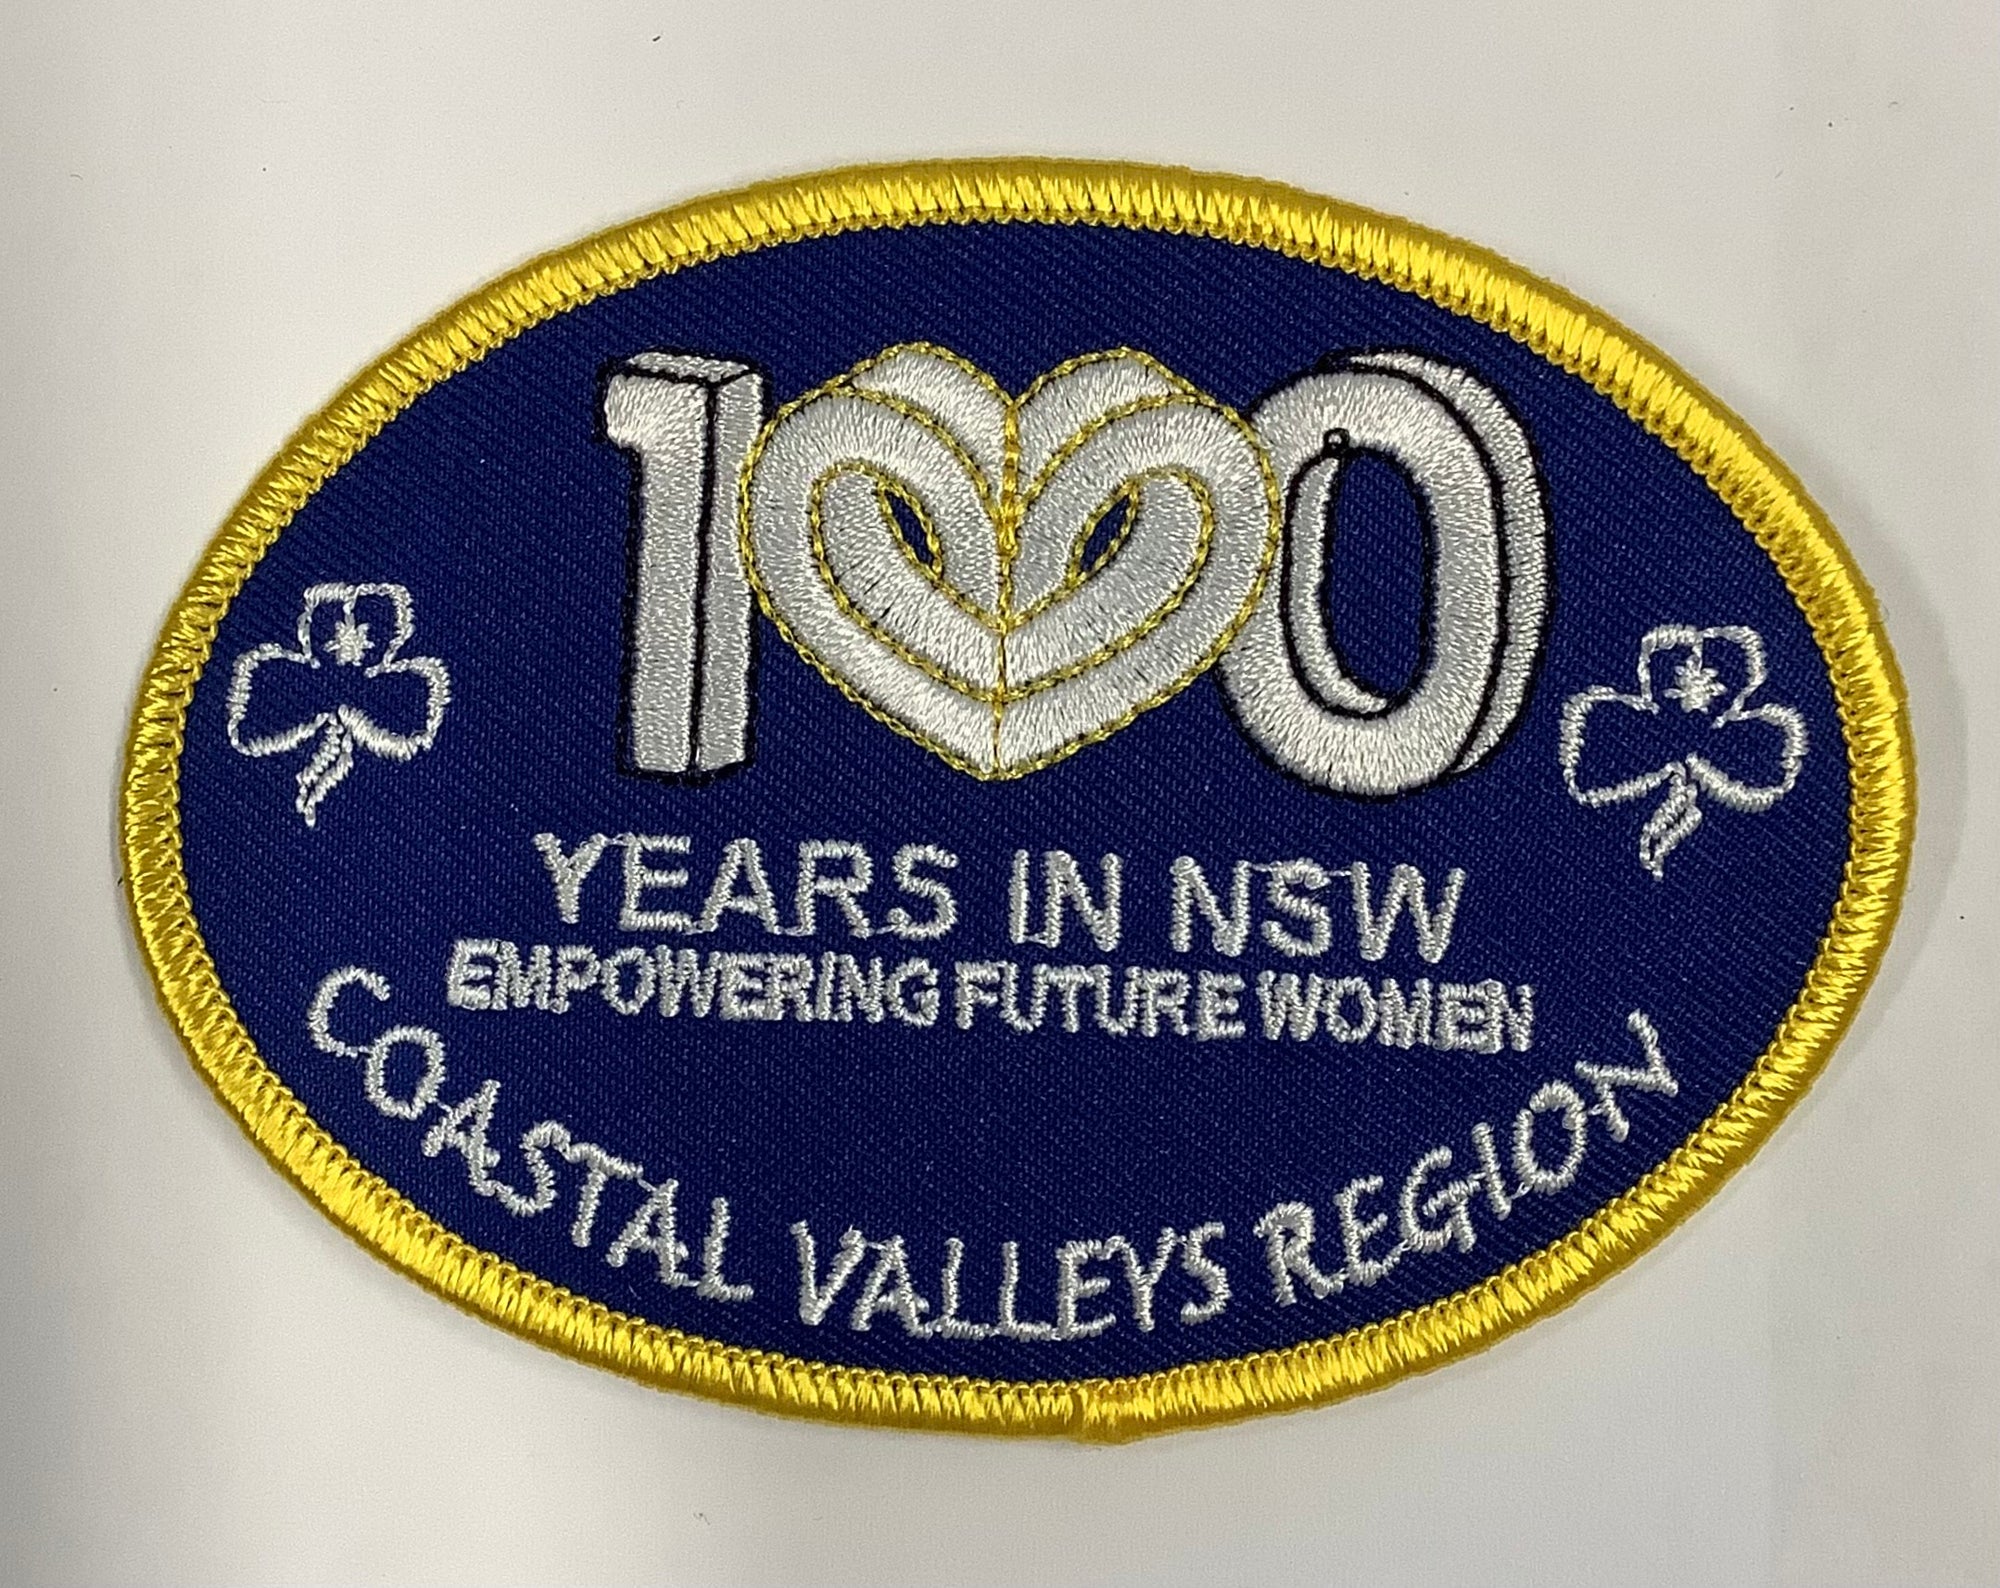 a dark blue oval shaped badge bound in gold with 100 years in NSW empowering future women embroidered on the badge